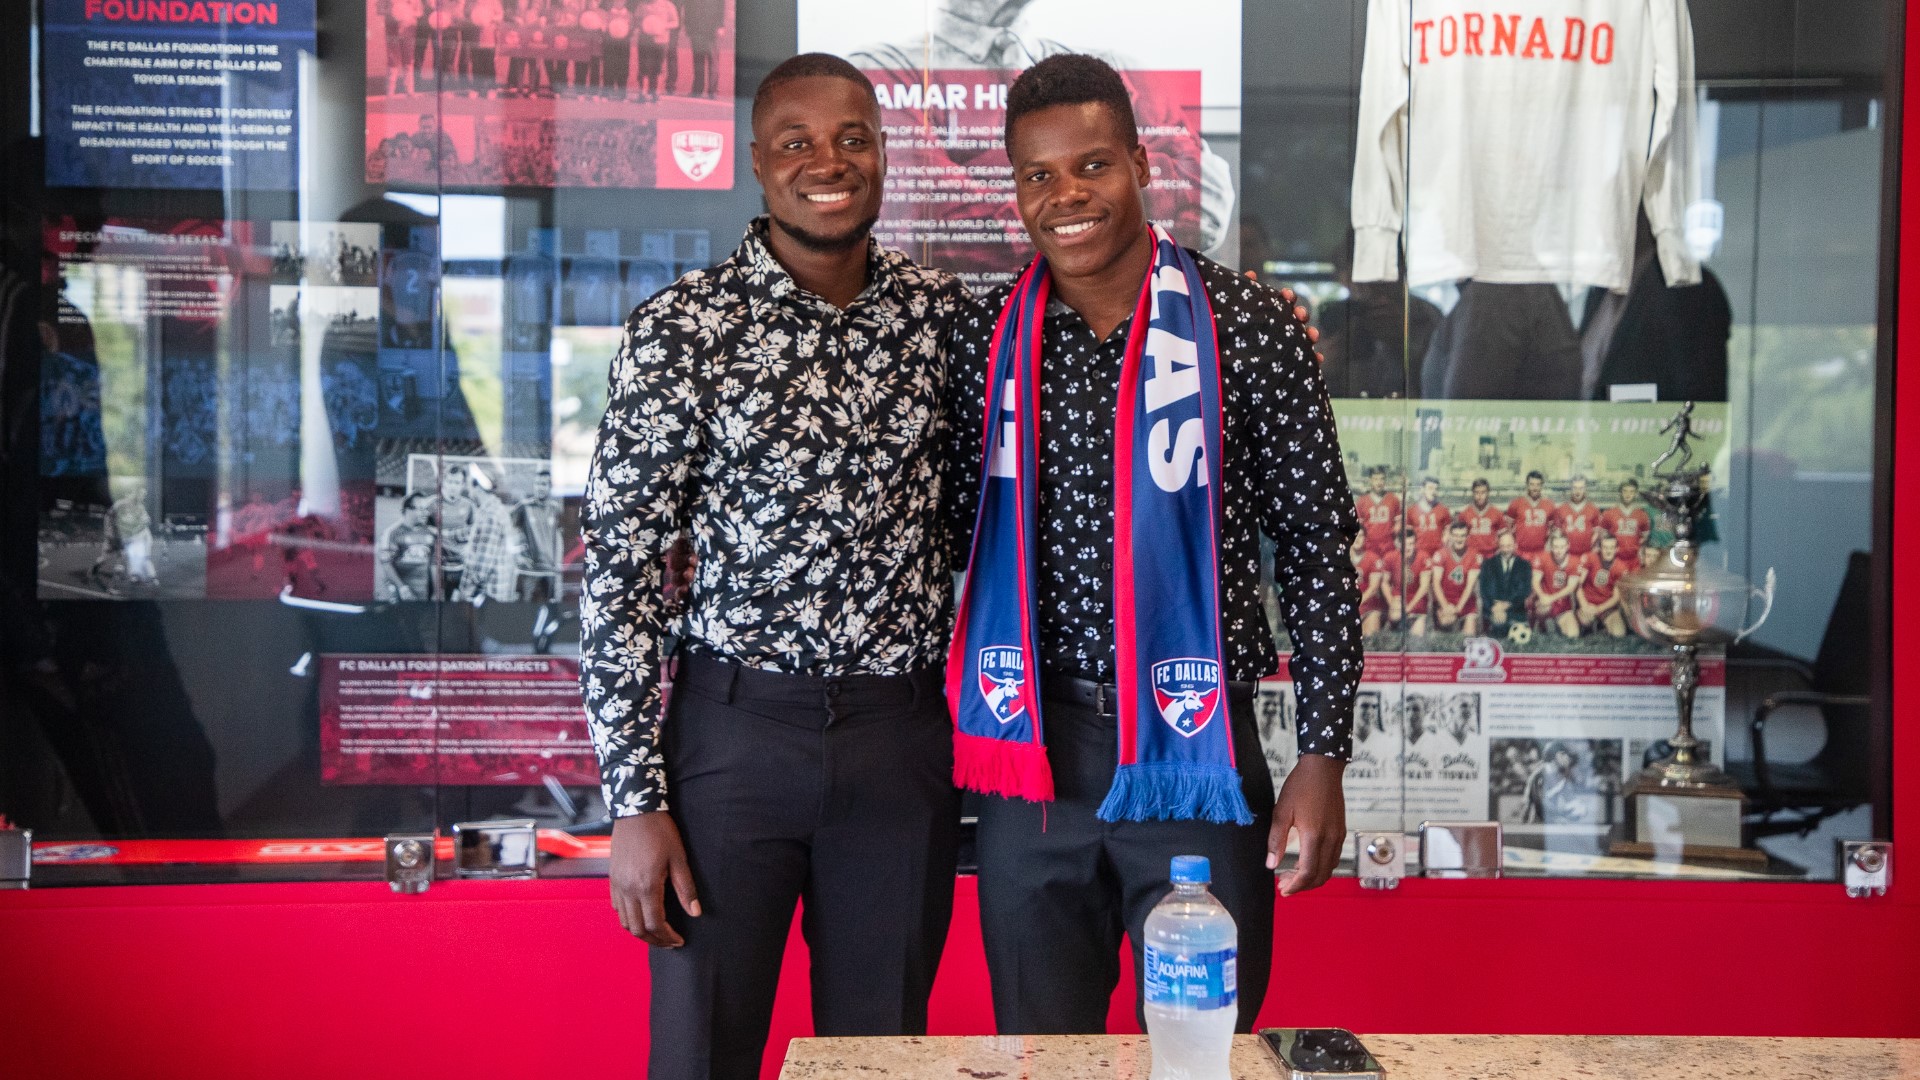 Bernard Kamungo moved to the U.S. as a teenage refugee with little to no possessions. His passion for soccer sparked a Hollywood-esque journey to the MLS.